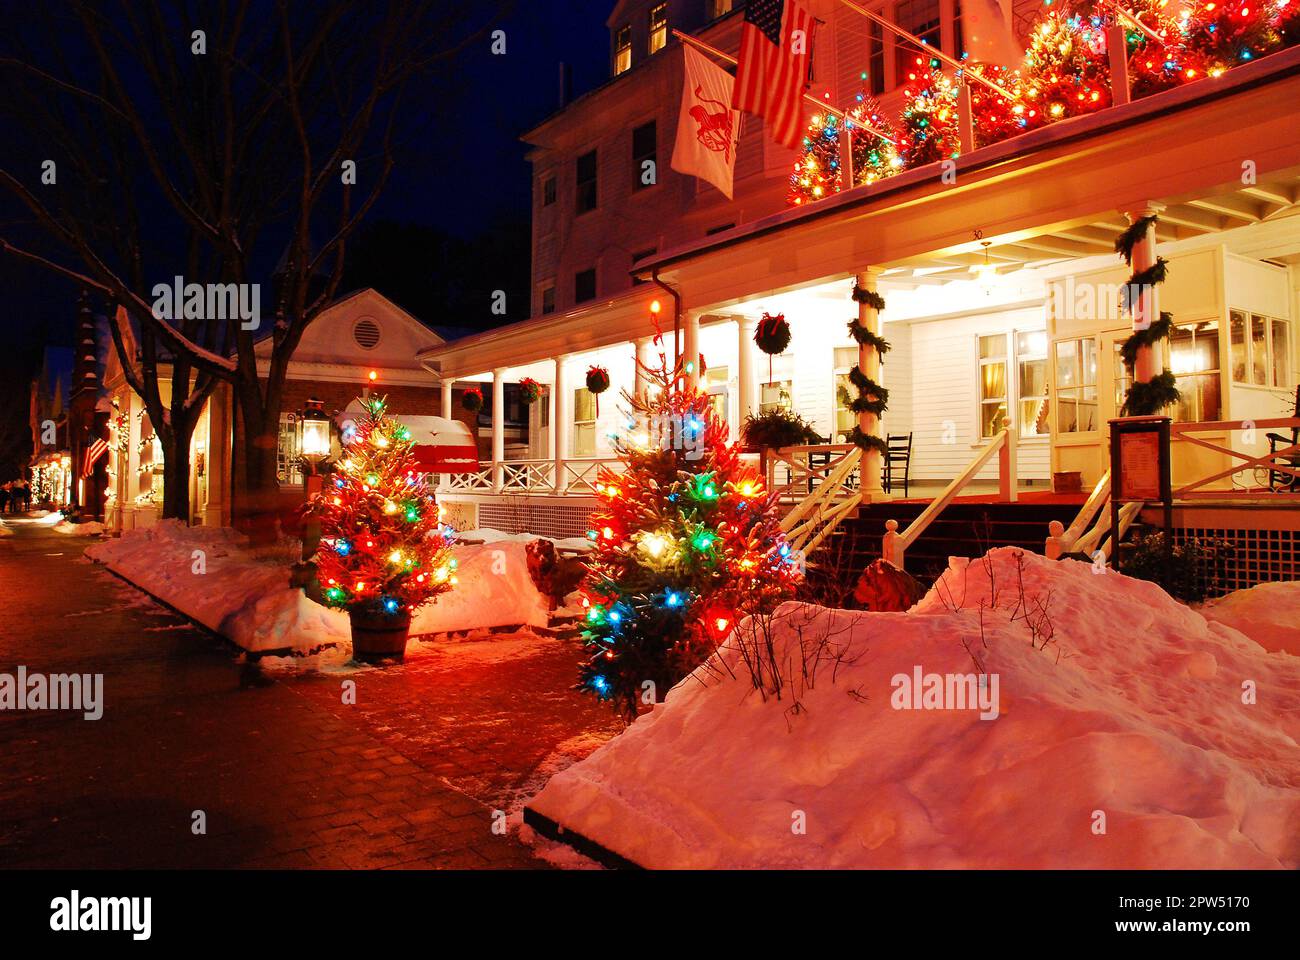 Christmas lights decorate a country inn on a snow covered winter night in New England Stock Photo